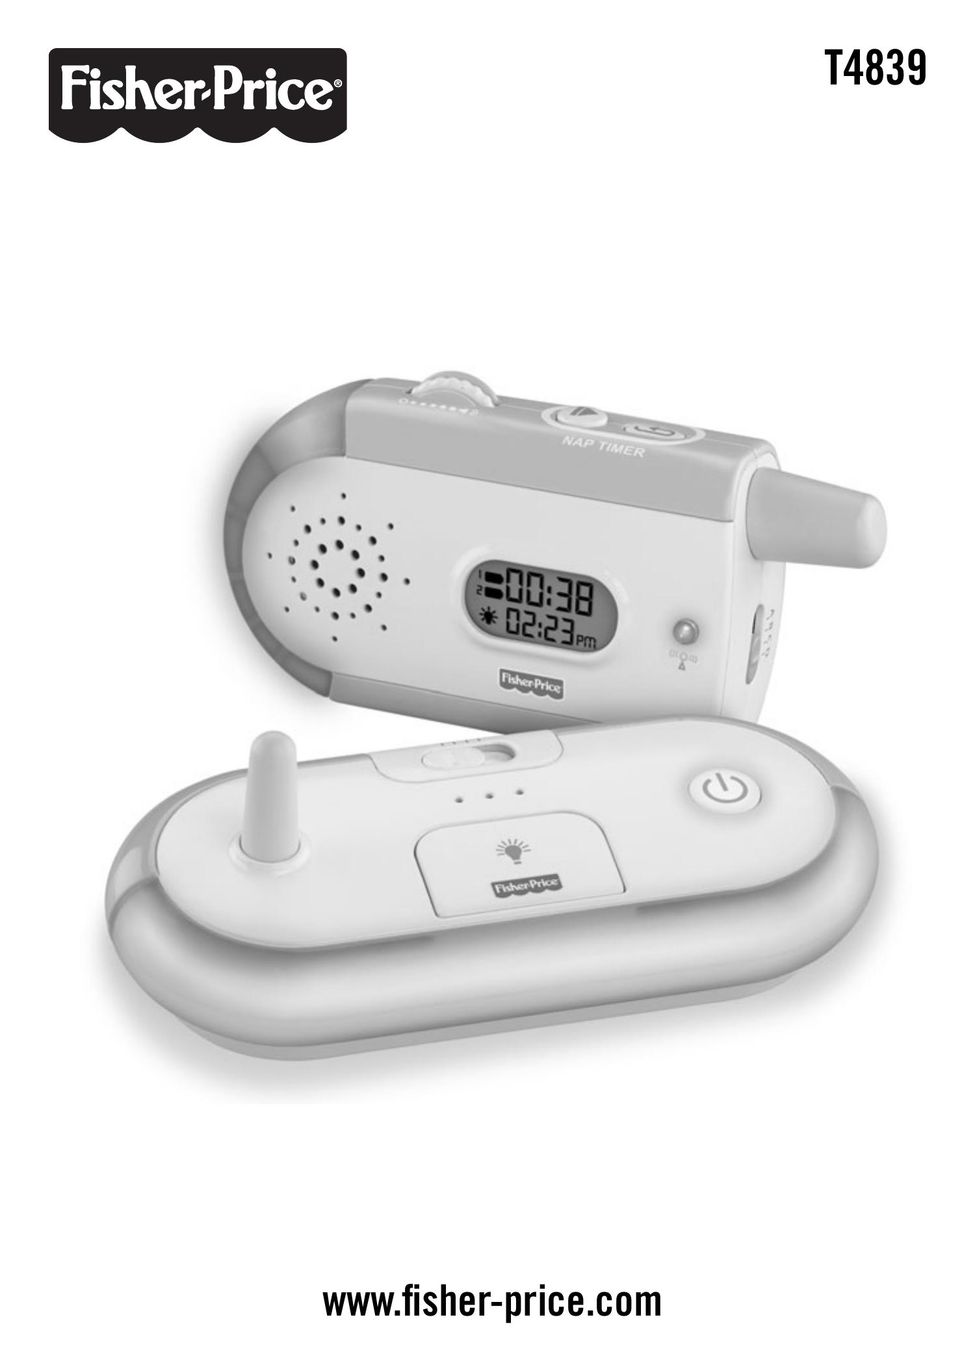 Fisher-Price T4839 Baby Monitor User Manual